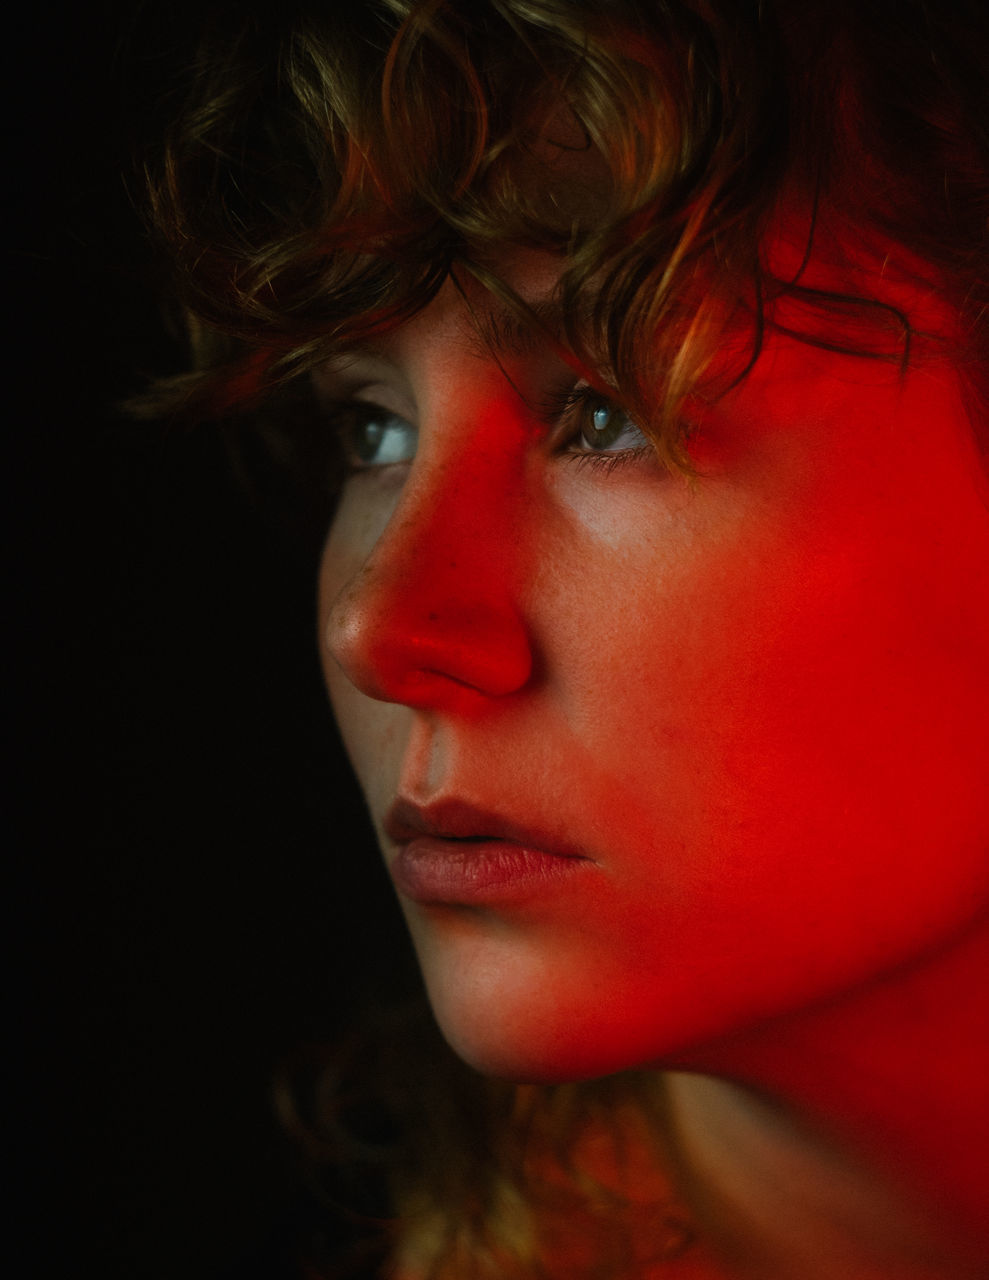 CLOSE-UP PORTRAIT OF WOMAN WITH RED EYES